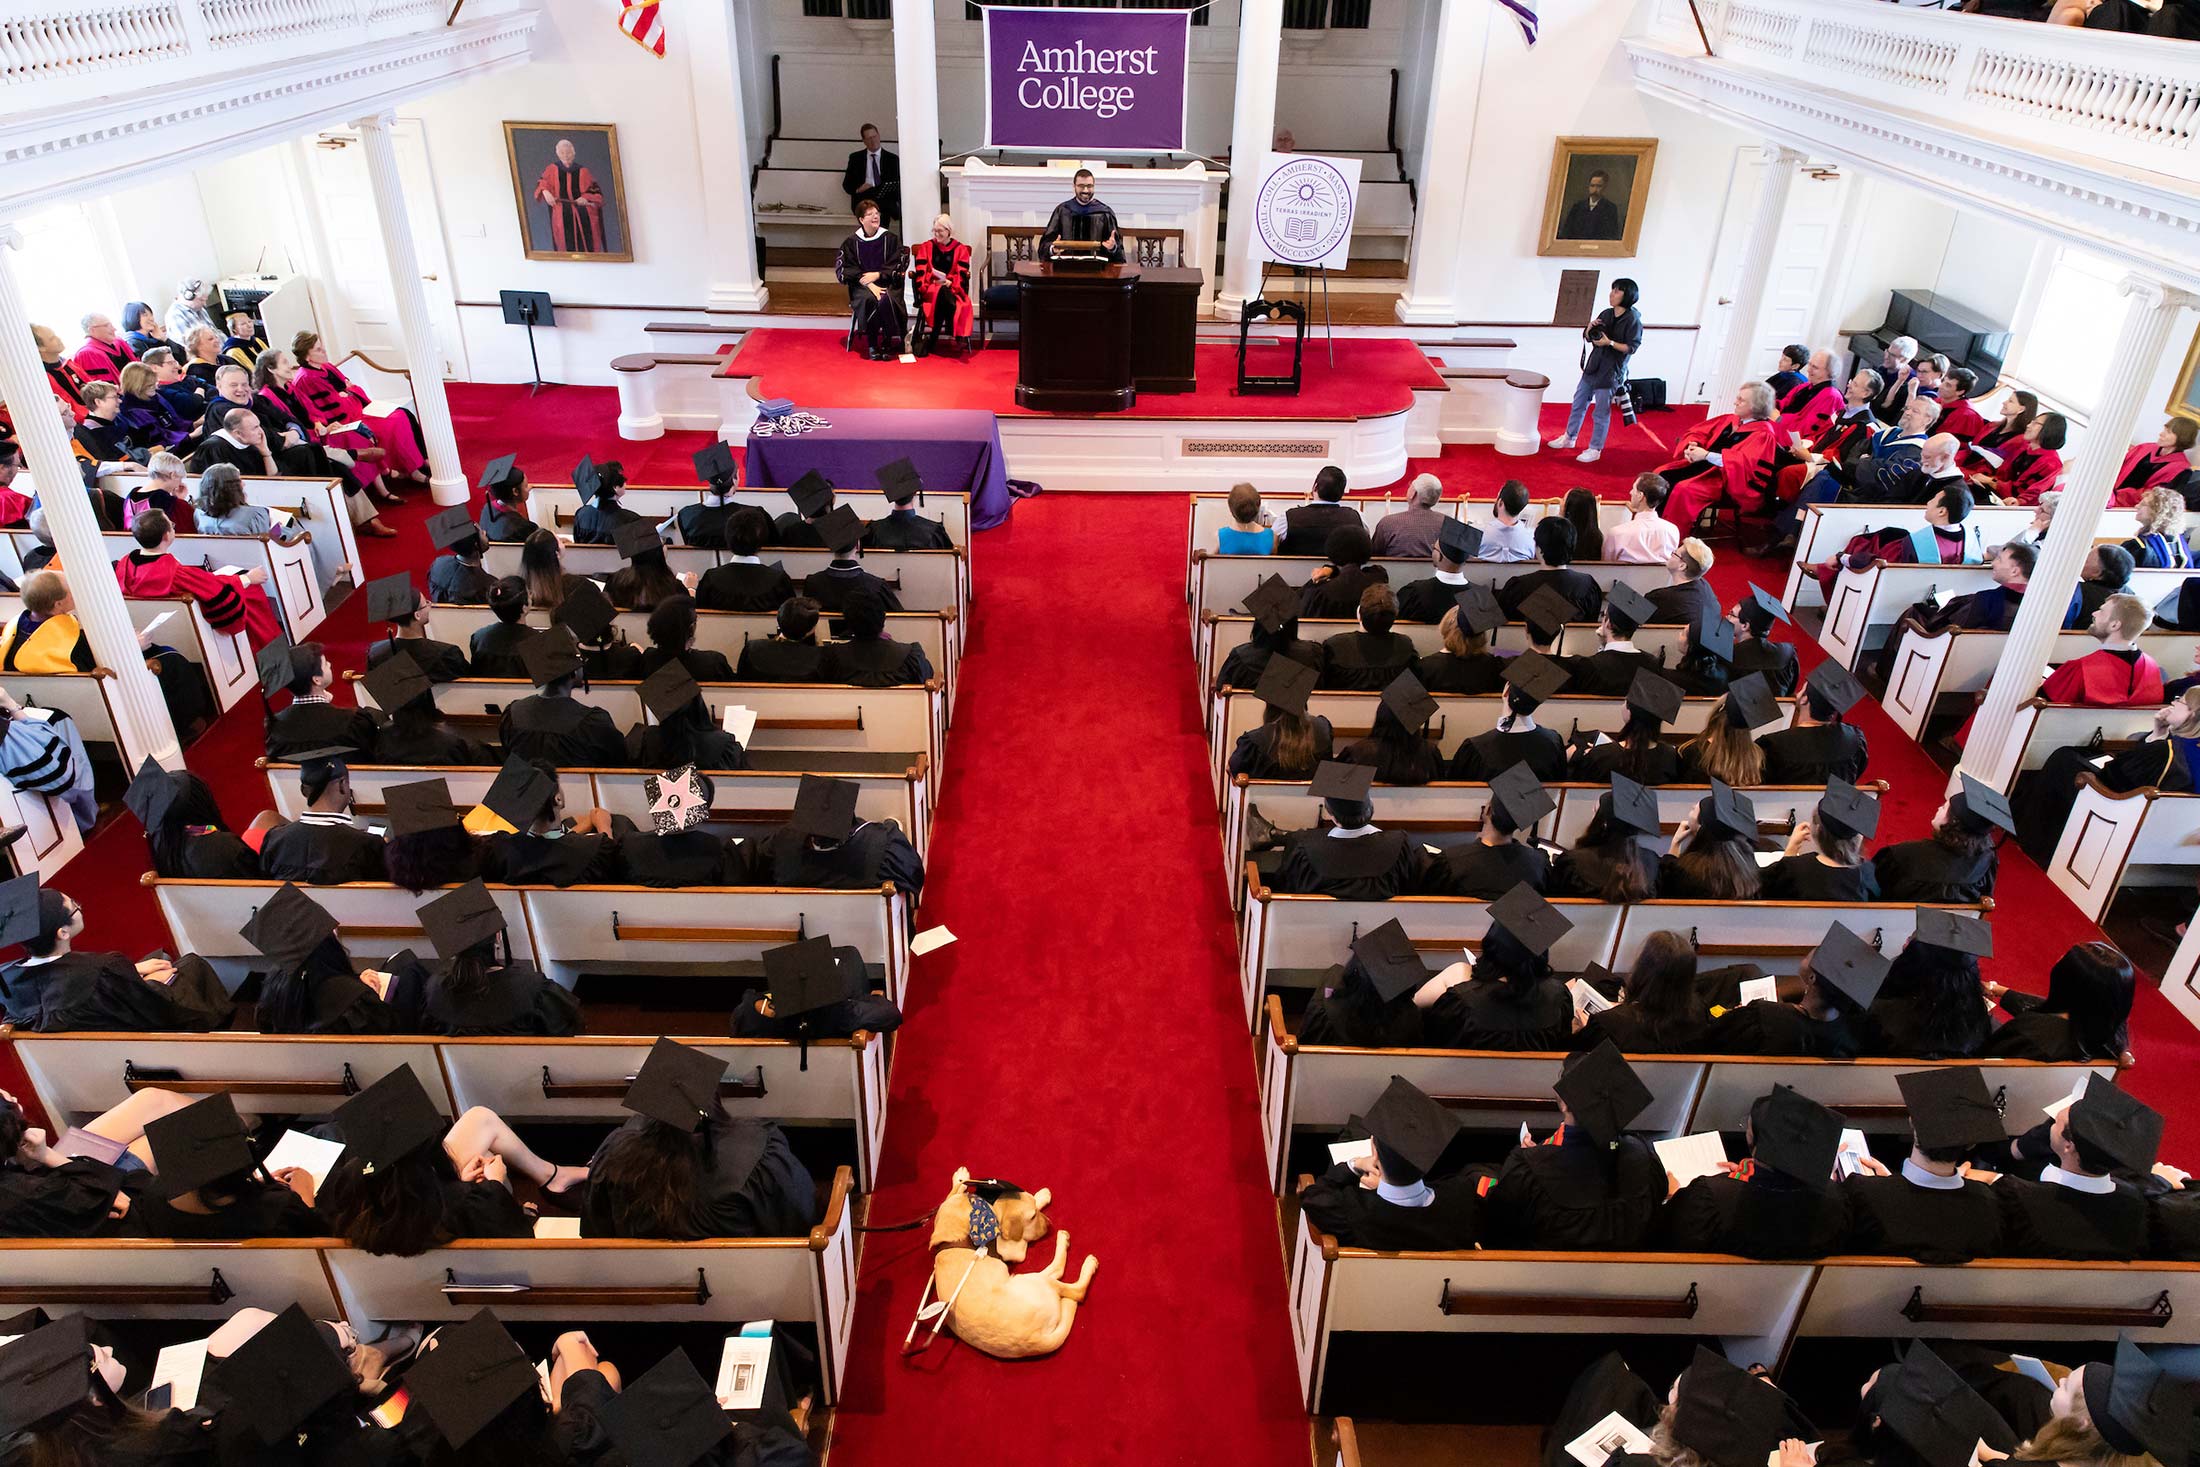 Student in commencement regalia gather in Johnson Chapel at Amherst College